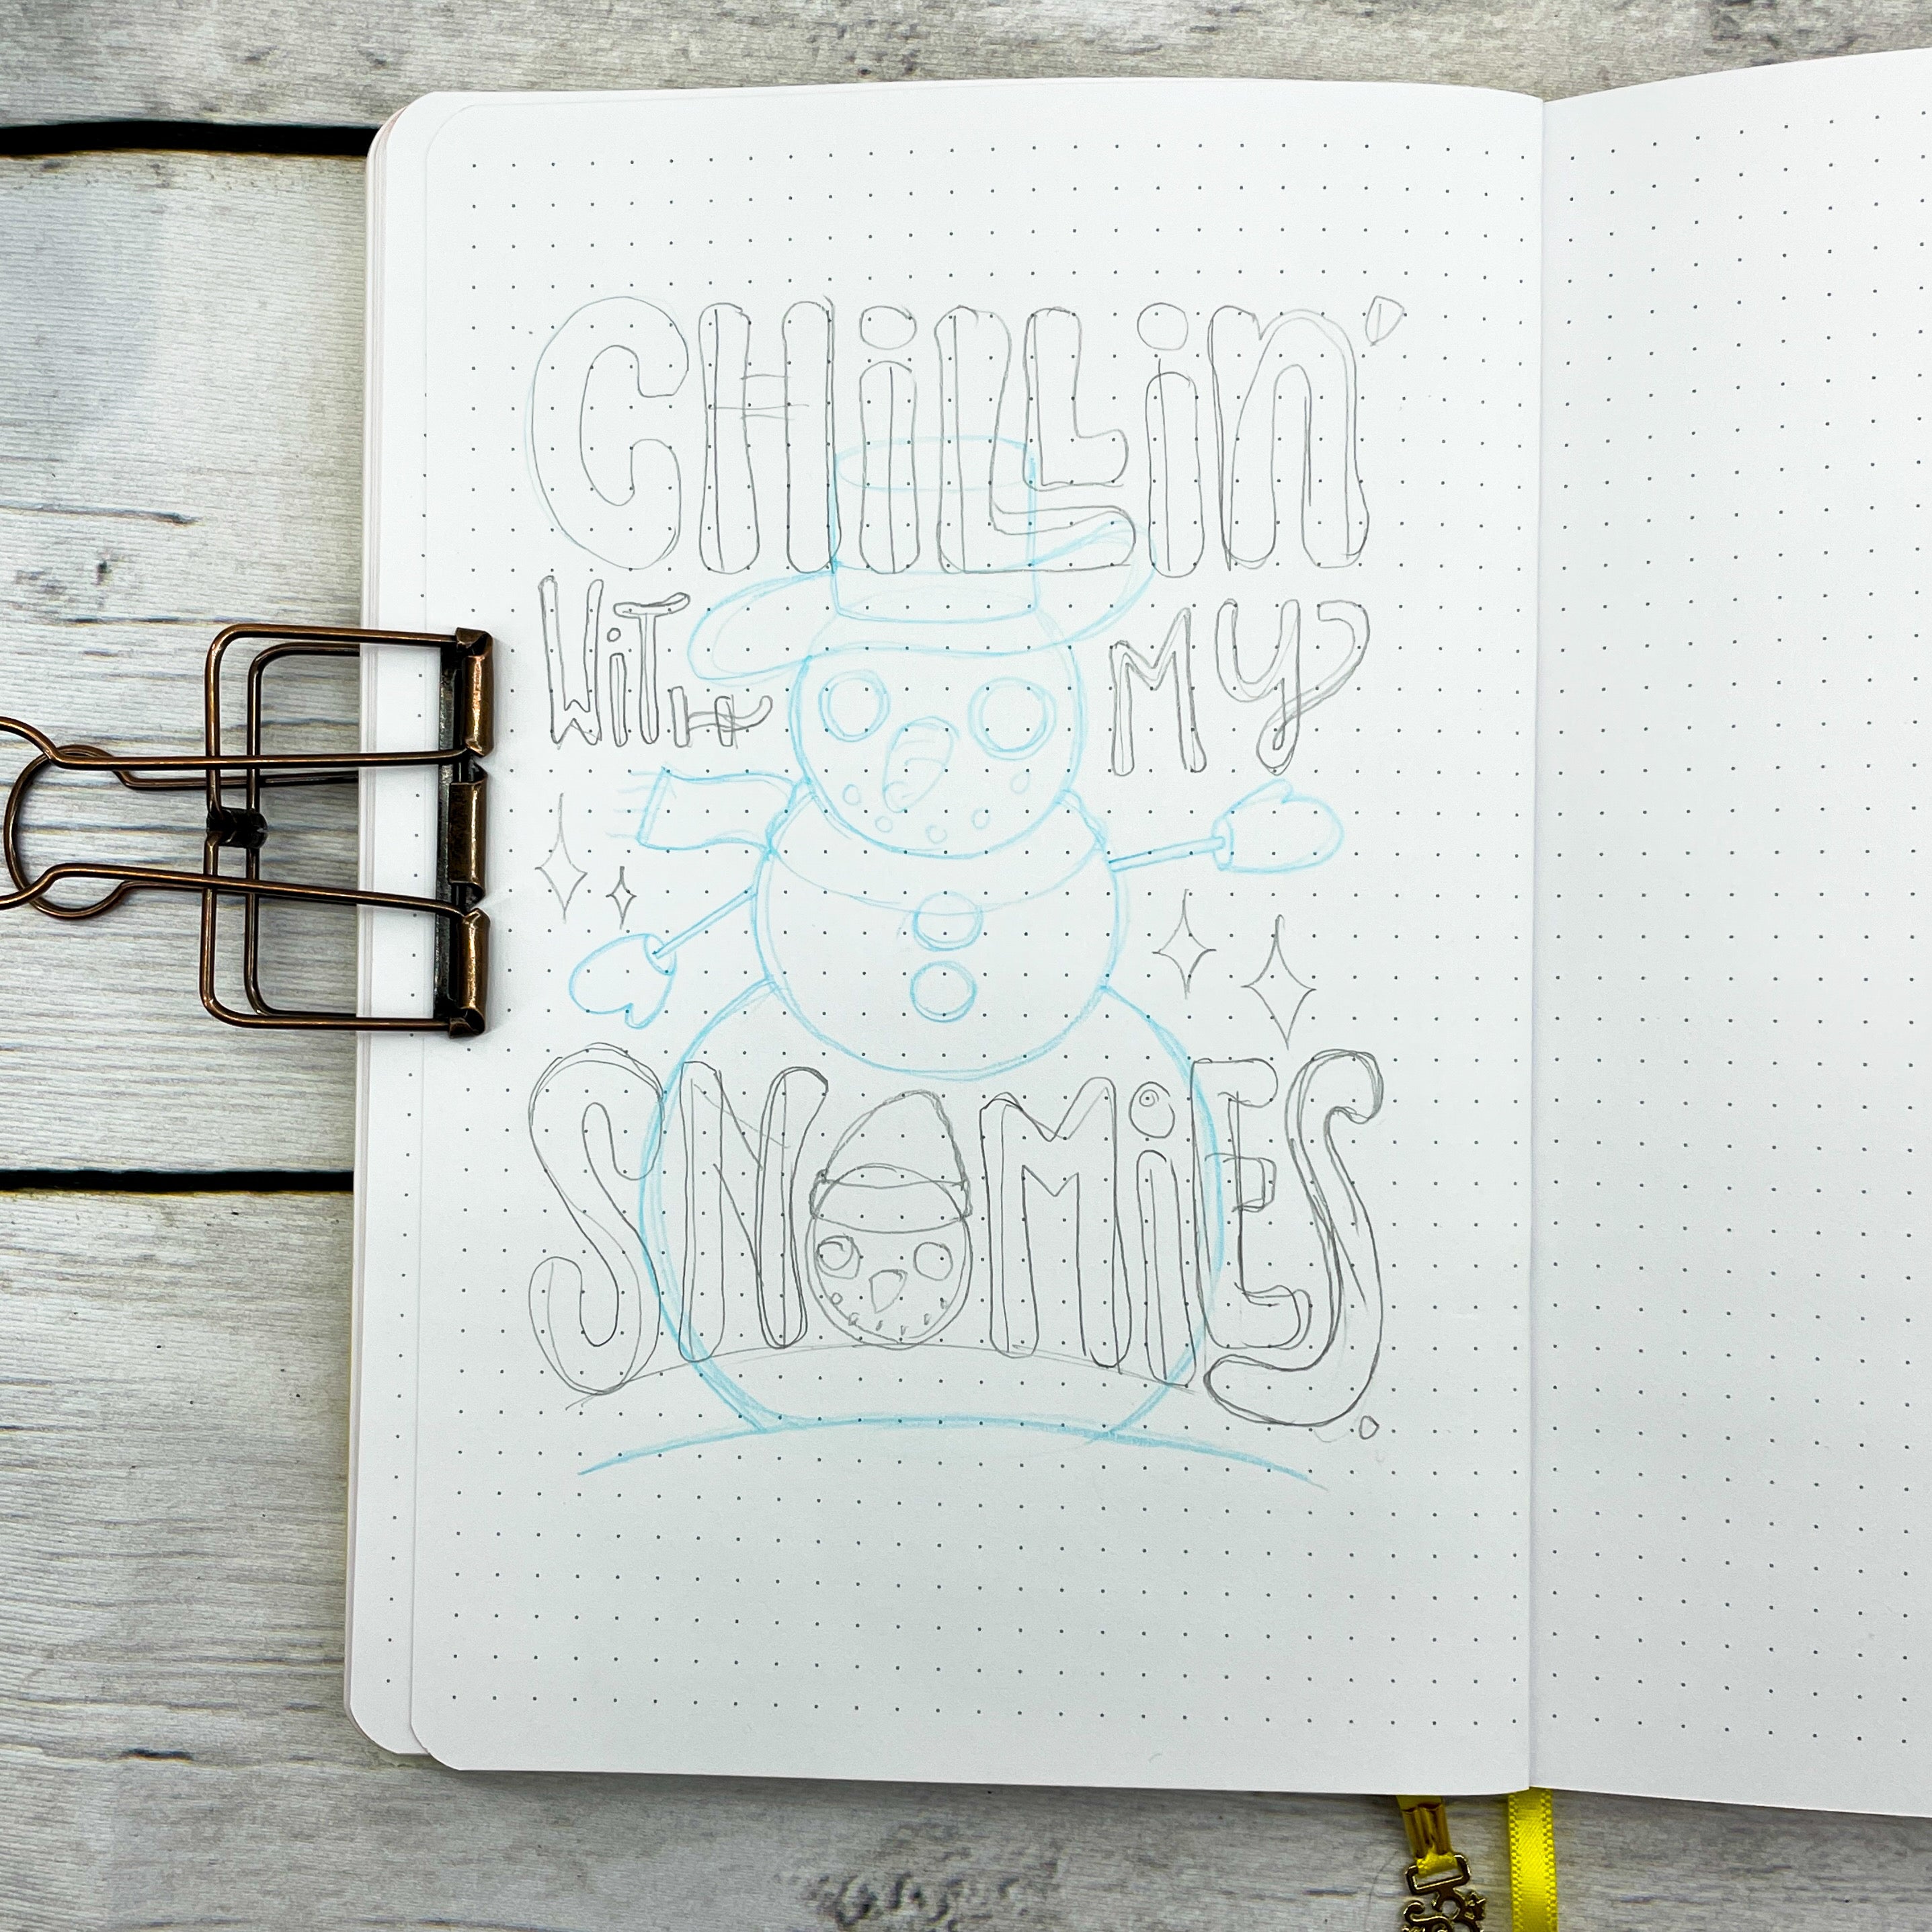 photo of sketch of blue snowman and the hand lettered quote "Chillin with my snowmies"